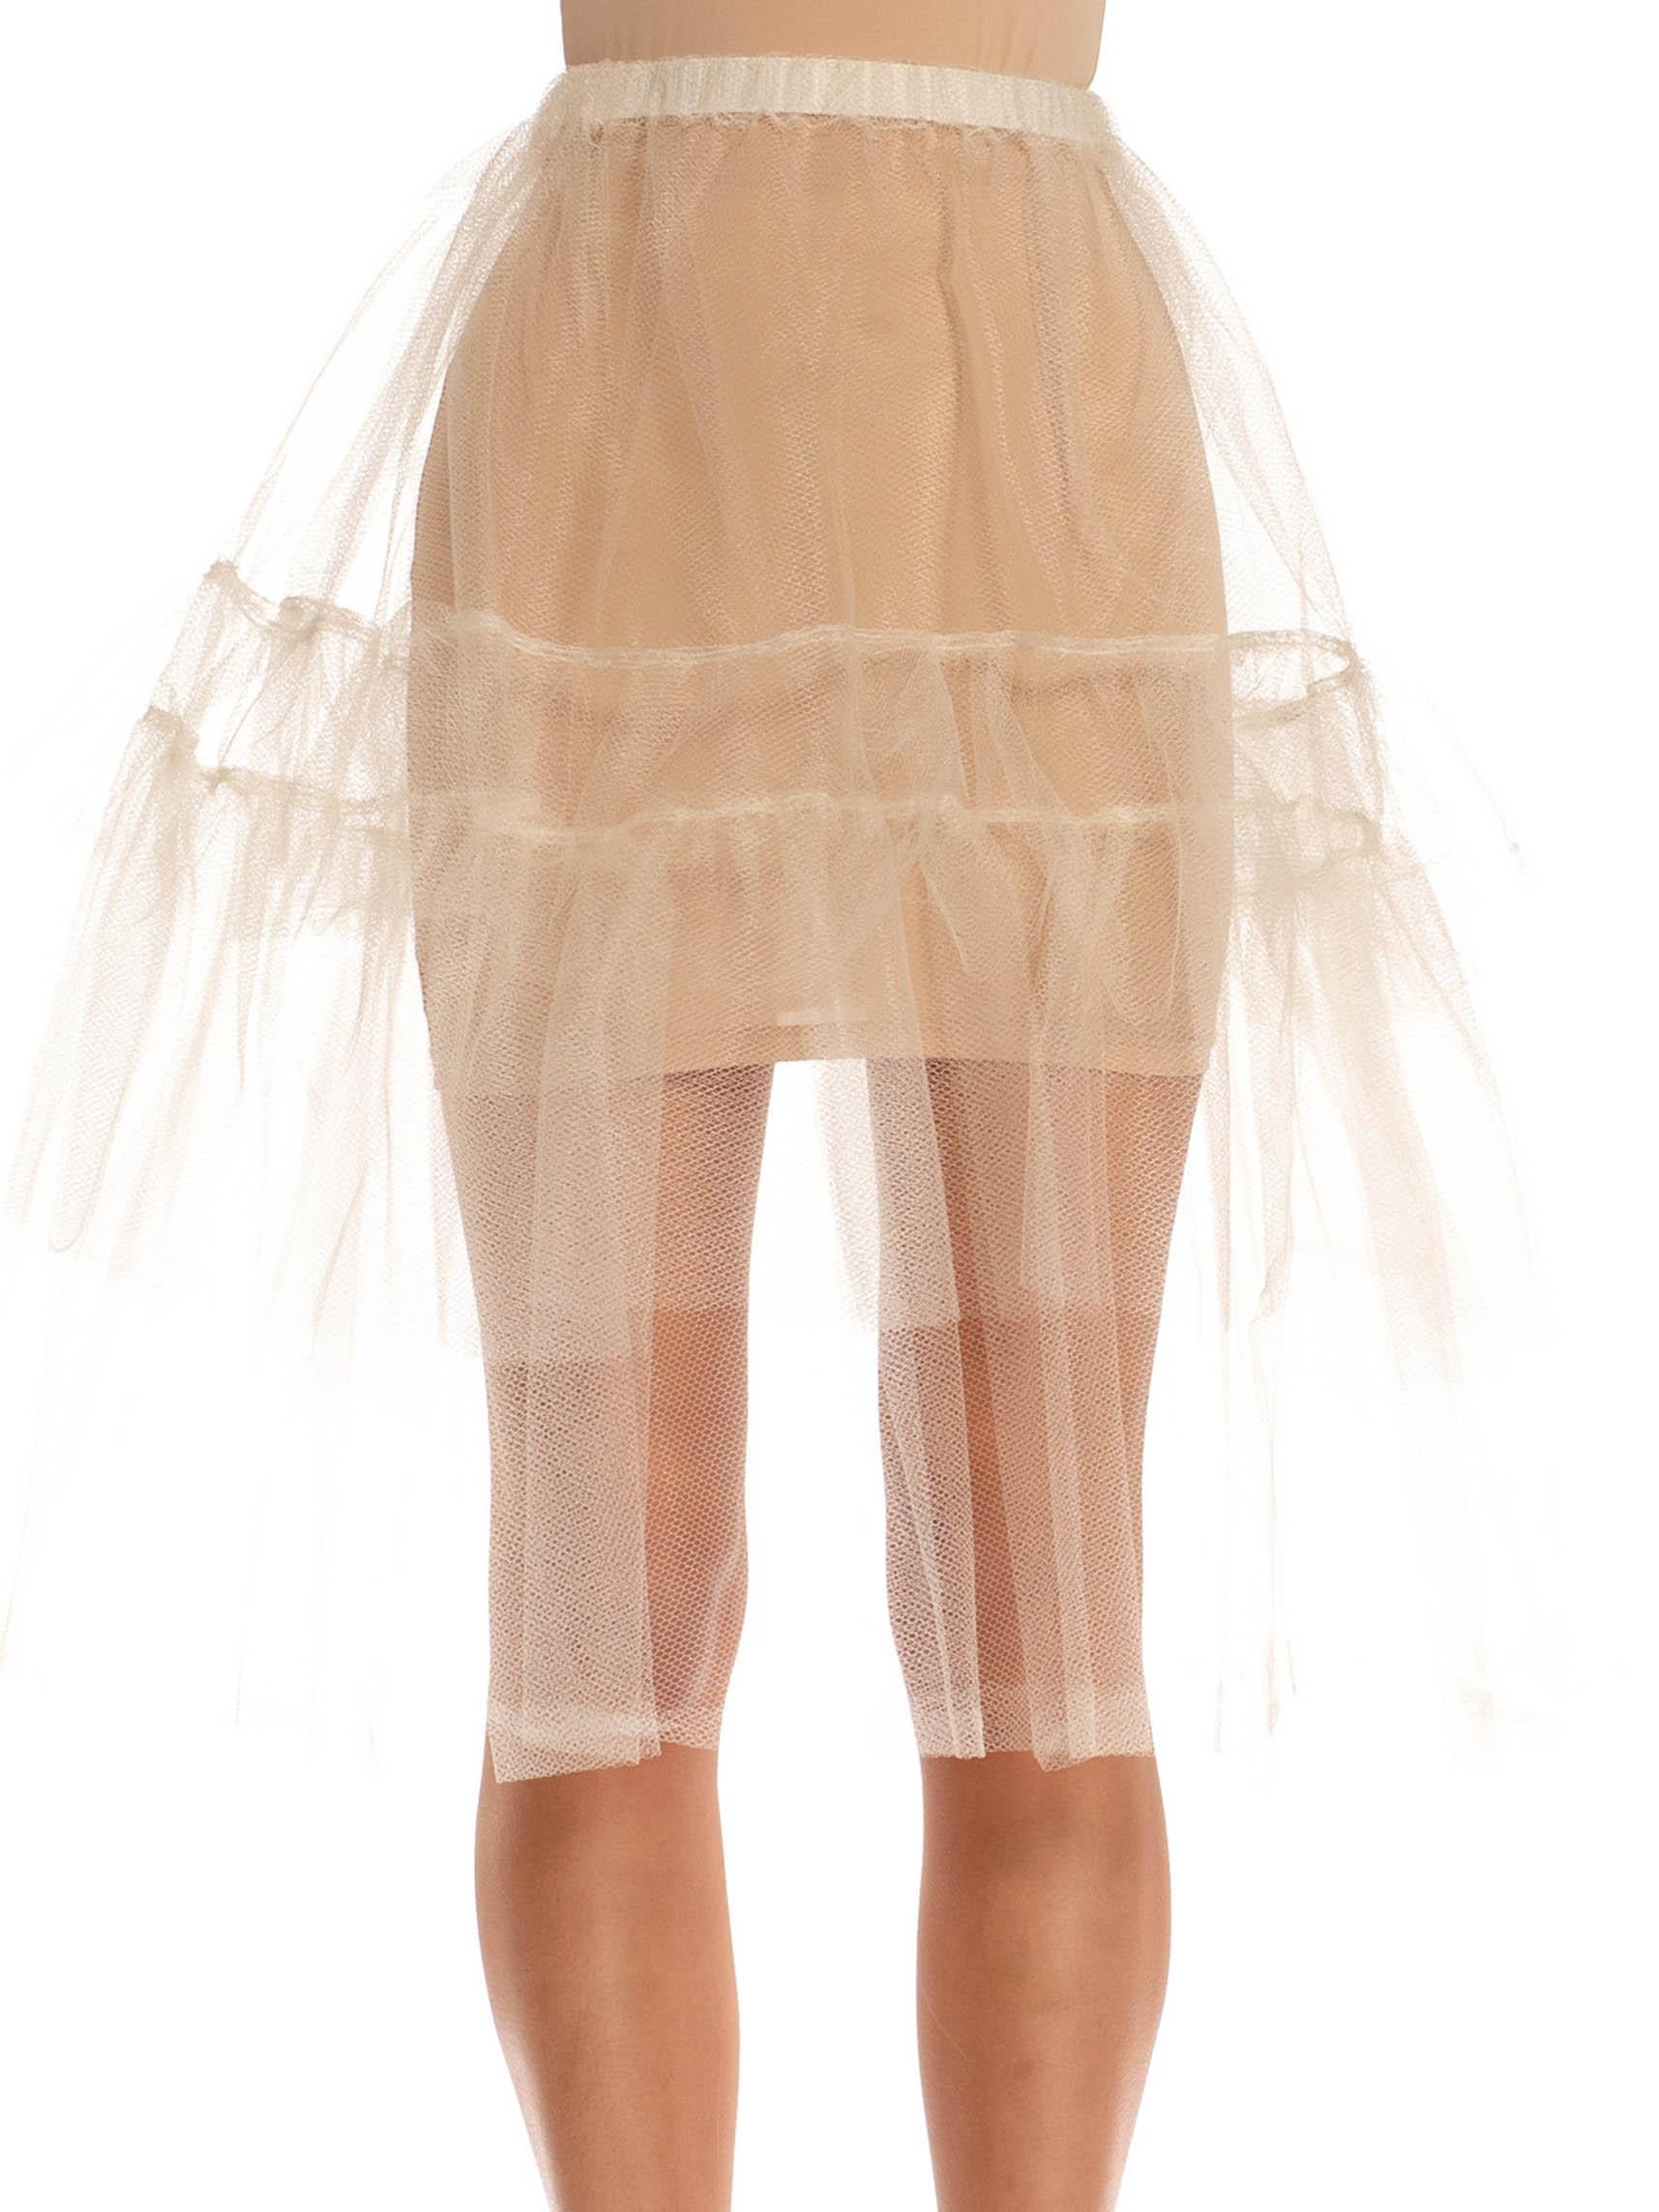 1980S White Tulle Tiered Tutu Skirt With Elastic Waistband For Sale 1